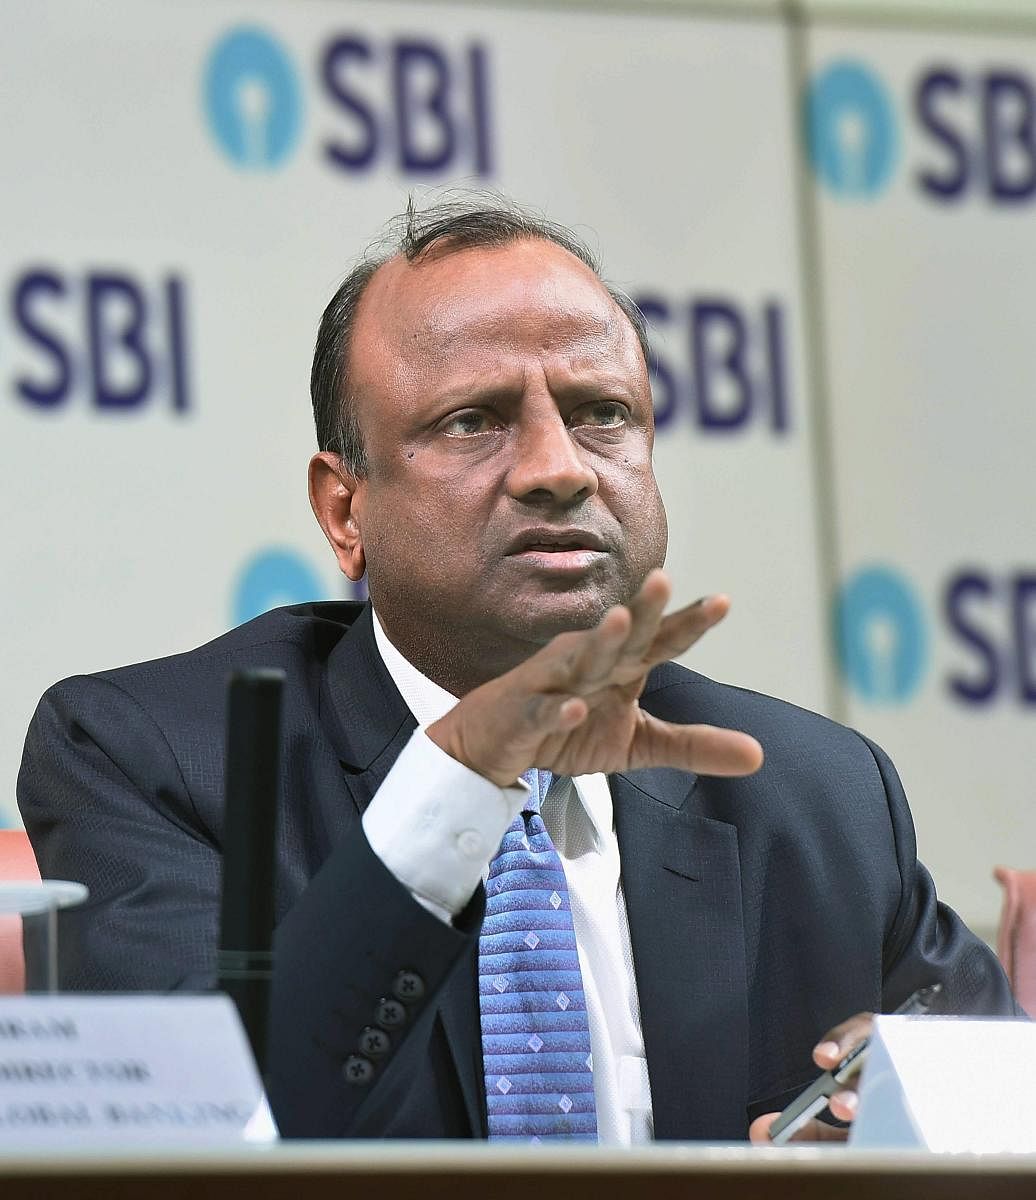 SBI chairperson Rajnish Kumar during the announcement of Q4 results, in Mumbai, on Tuesday. PTI